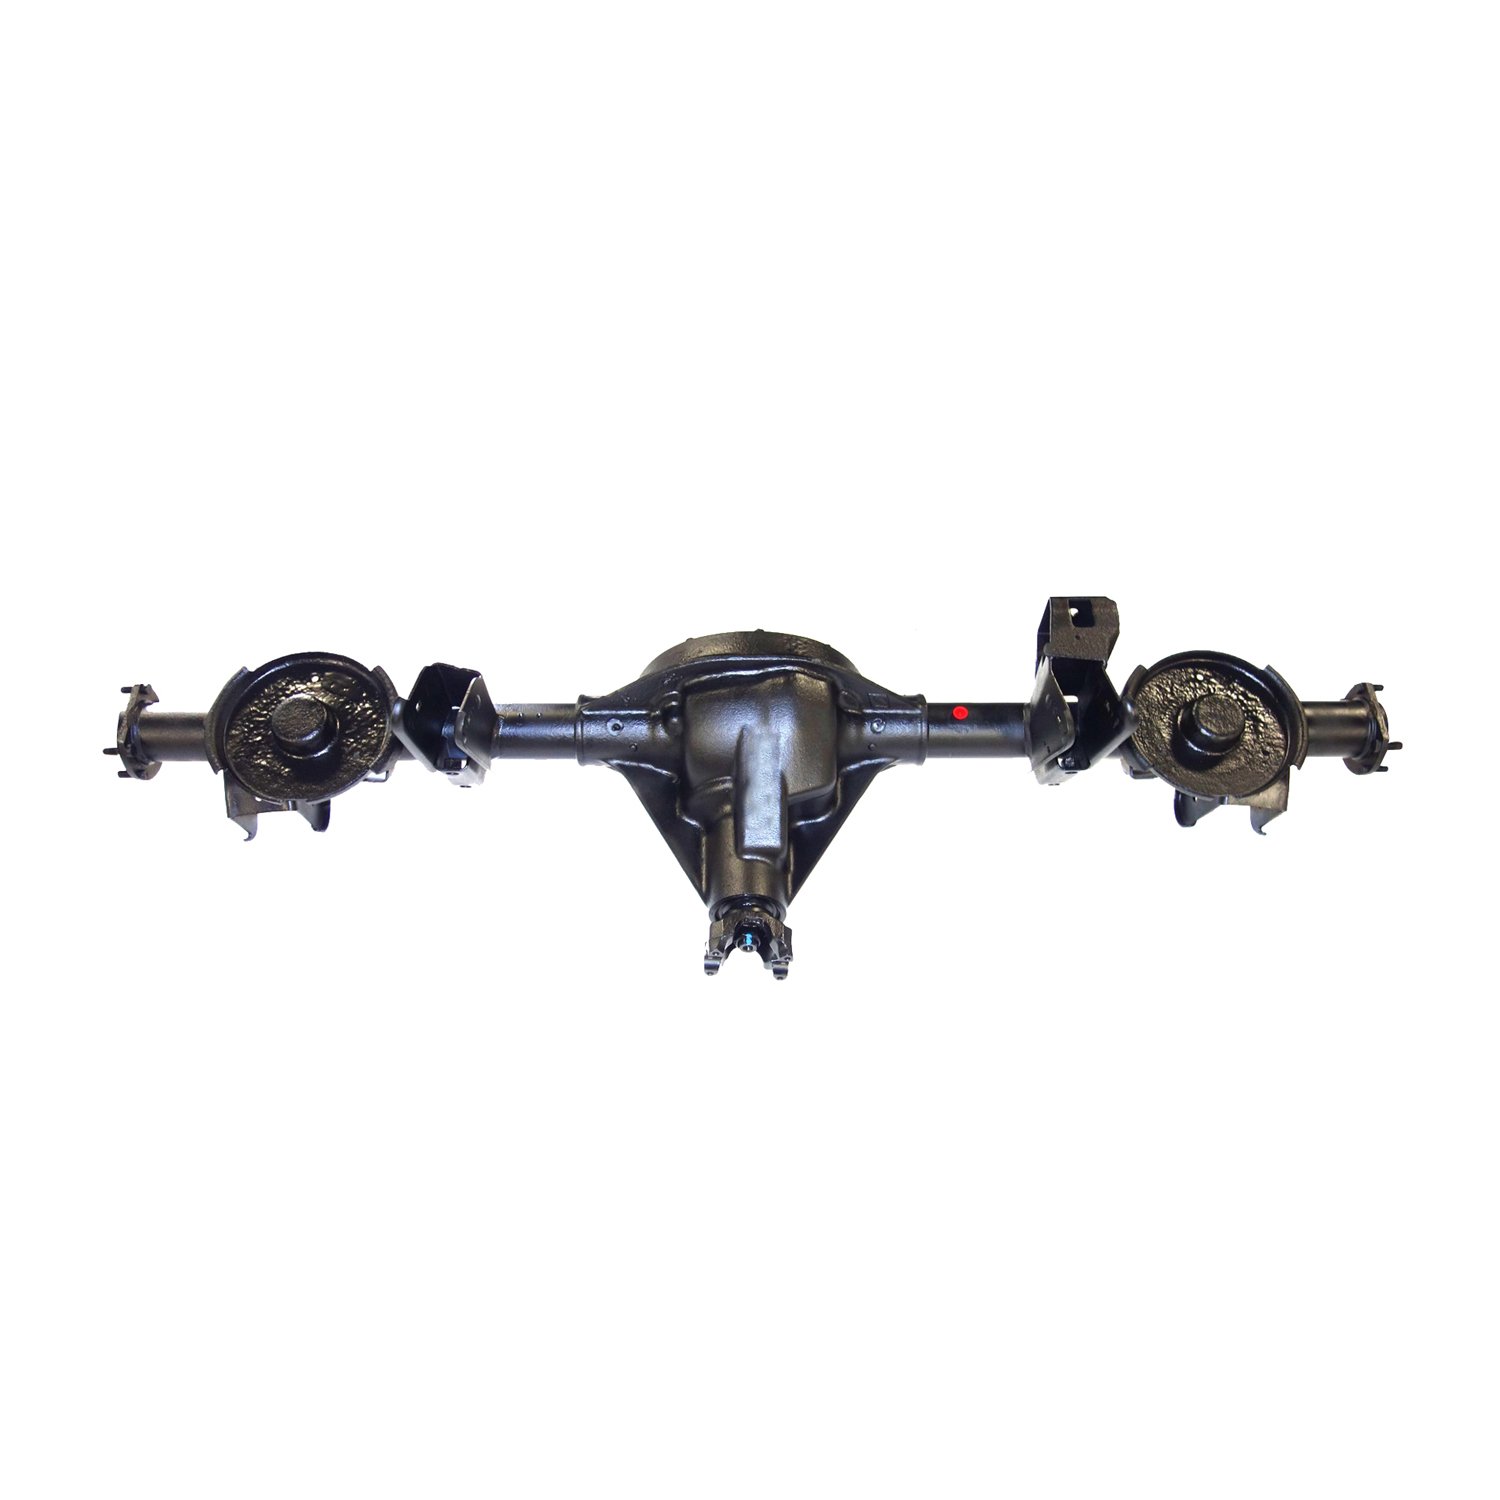 Remanufactured Complete Axle Assembly for Dana 35 99-04 Grand Cherokee 3.73 , Posi LSD